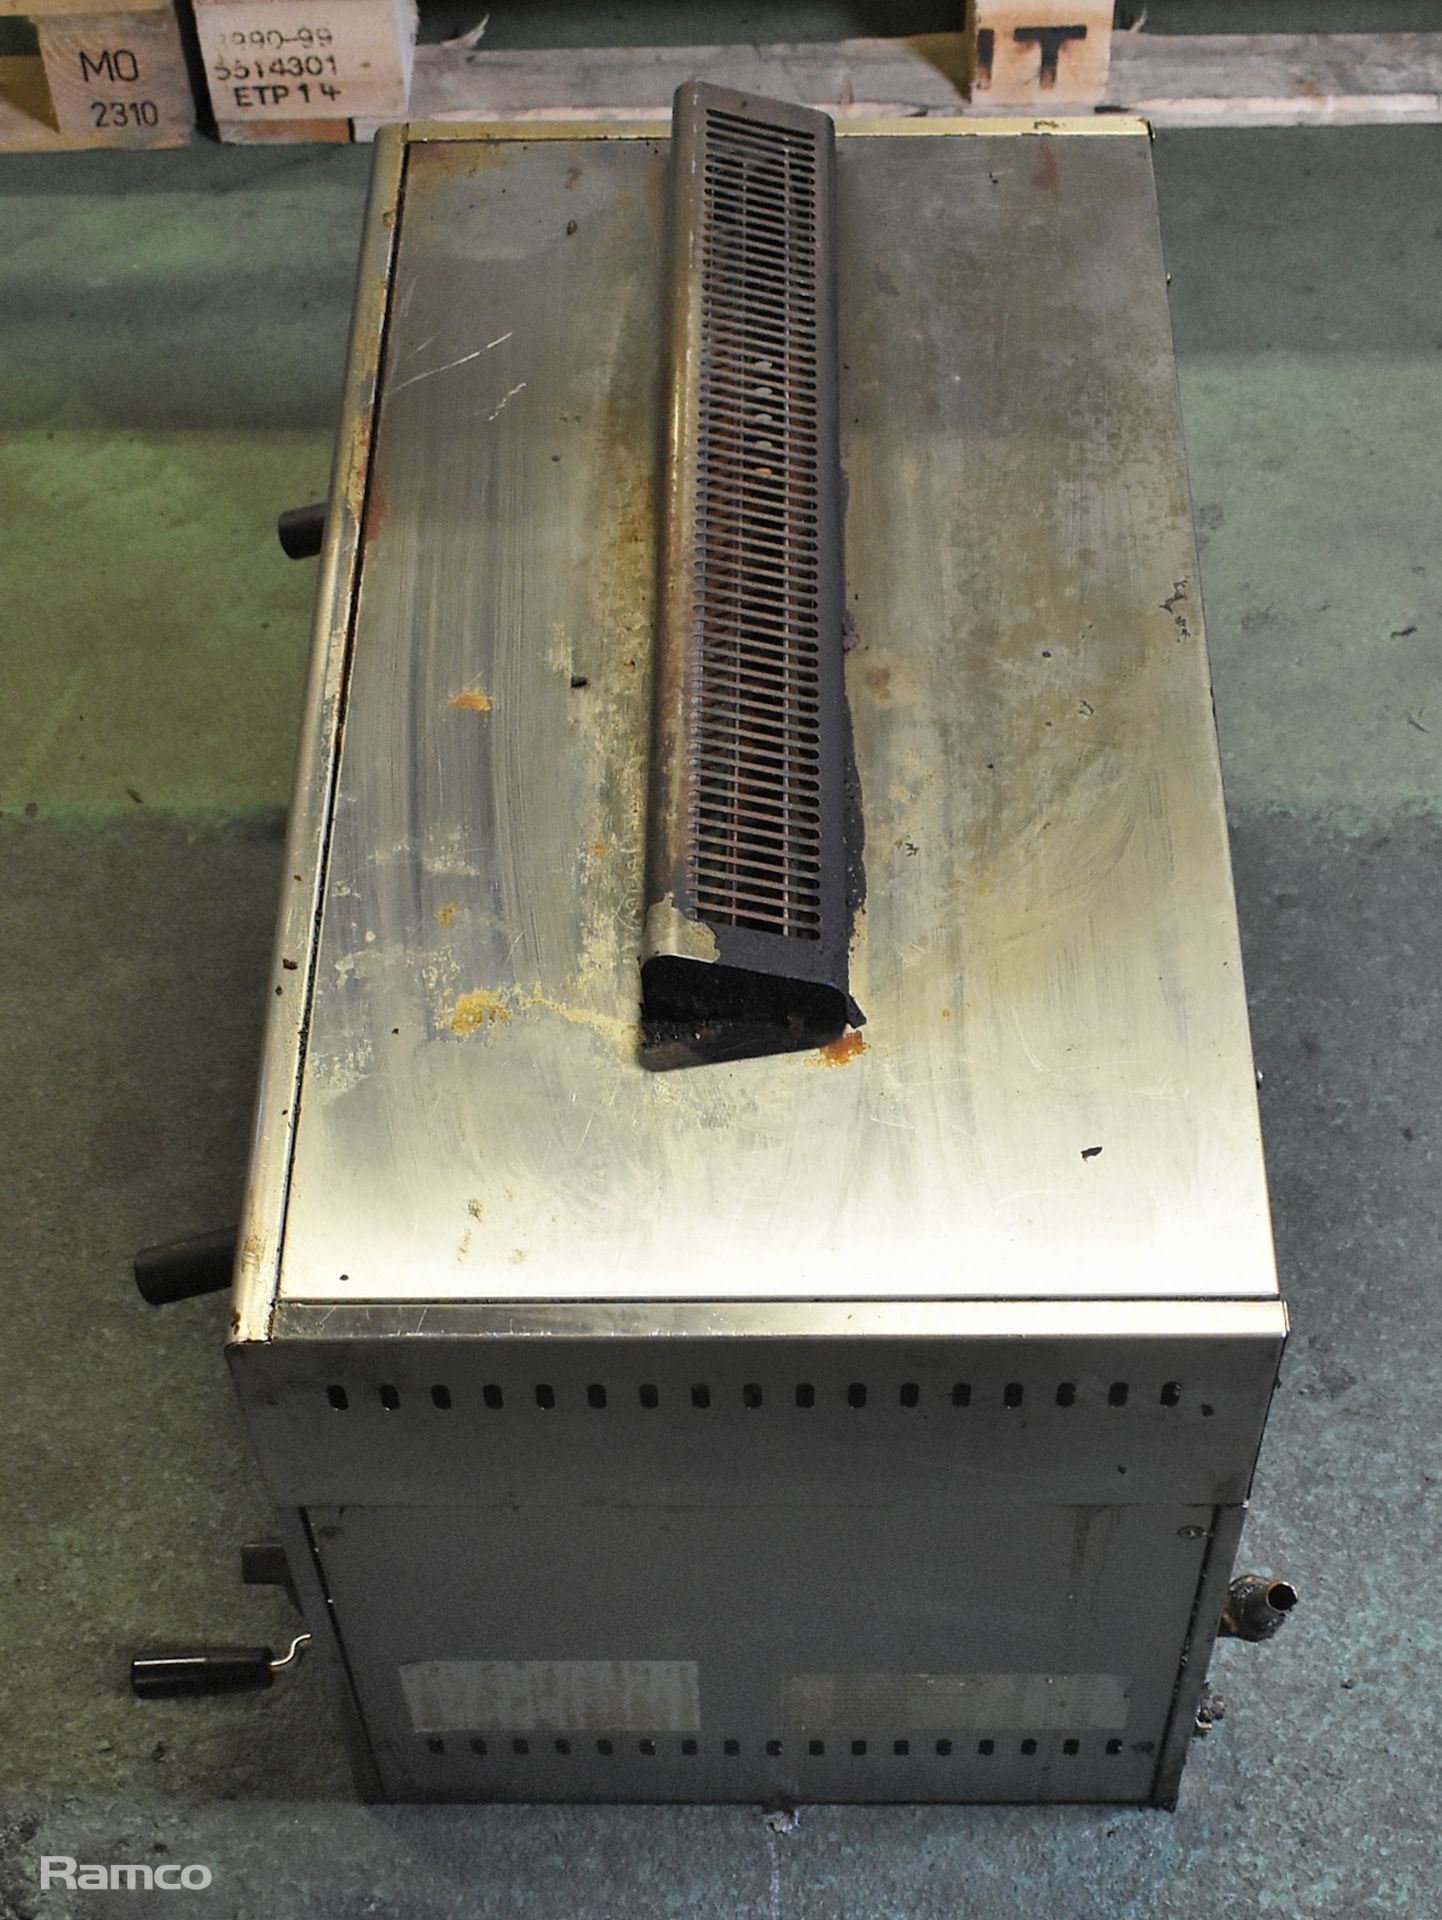 Stainless steel gas salamander grill - W 750 x D 500 x H 430mm - Image 4 of 6